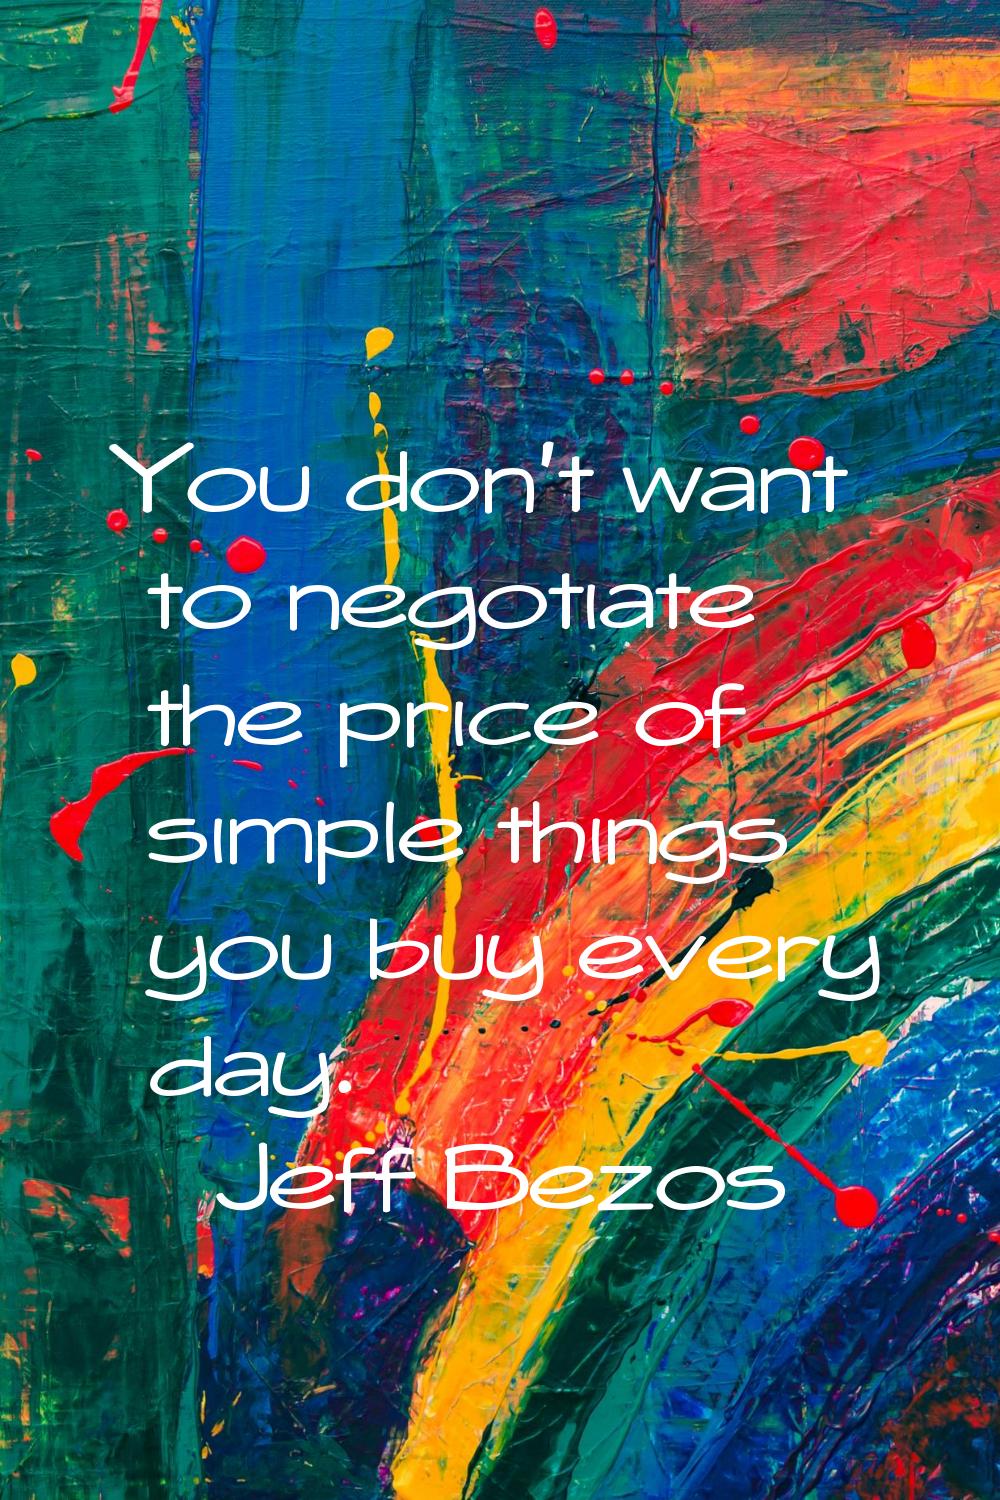 You don't want to negotiate the price of simple things you buy every day.